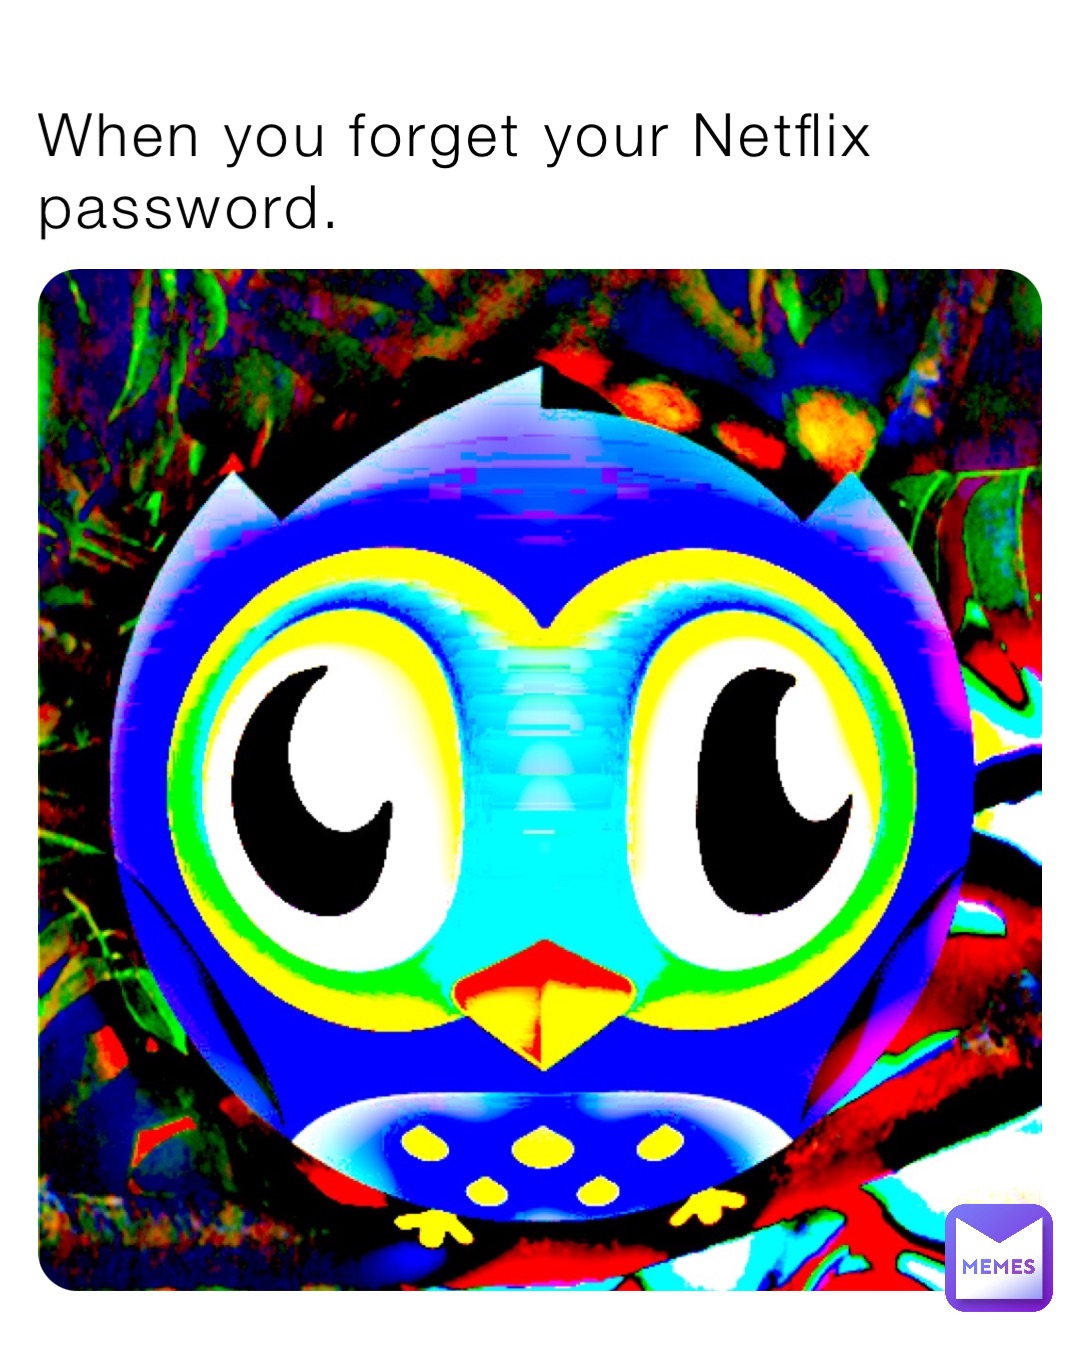 When you forget your Netflix password.